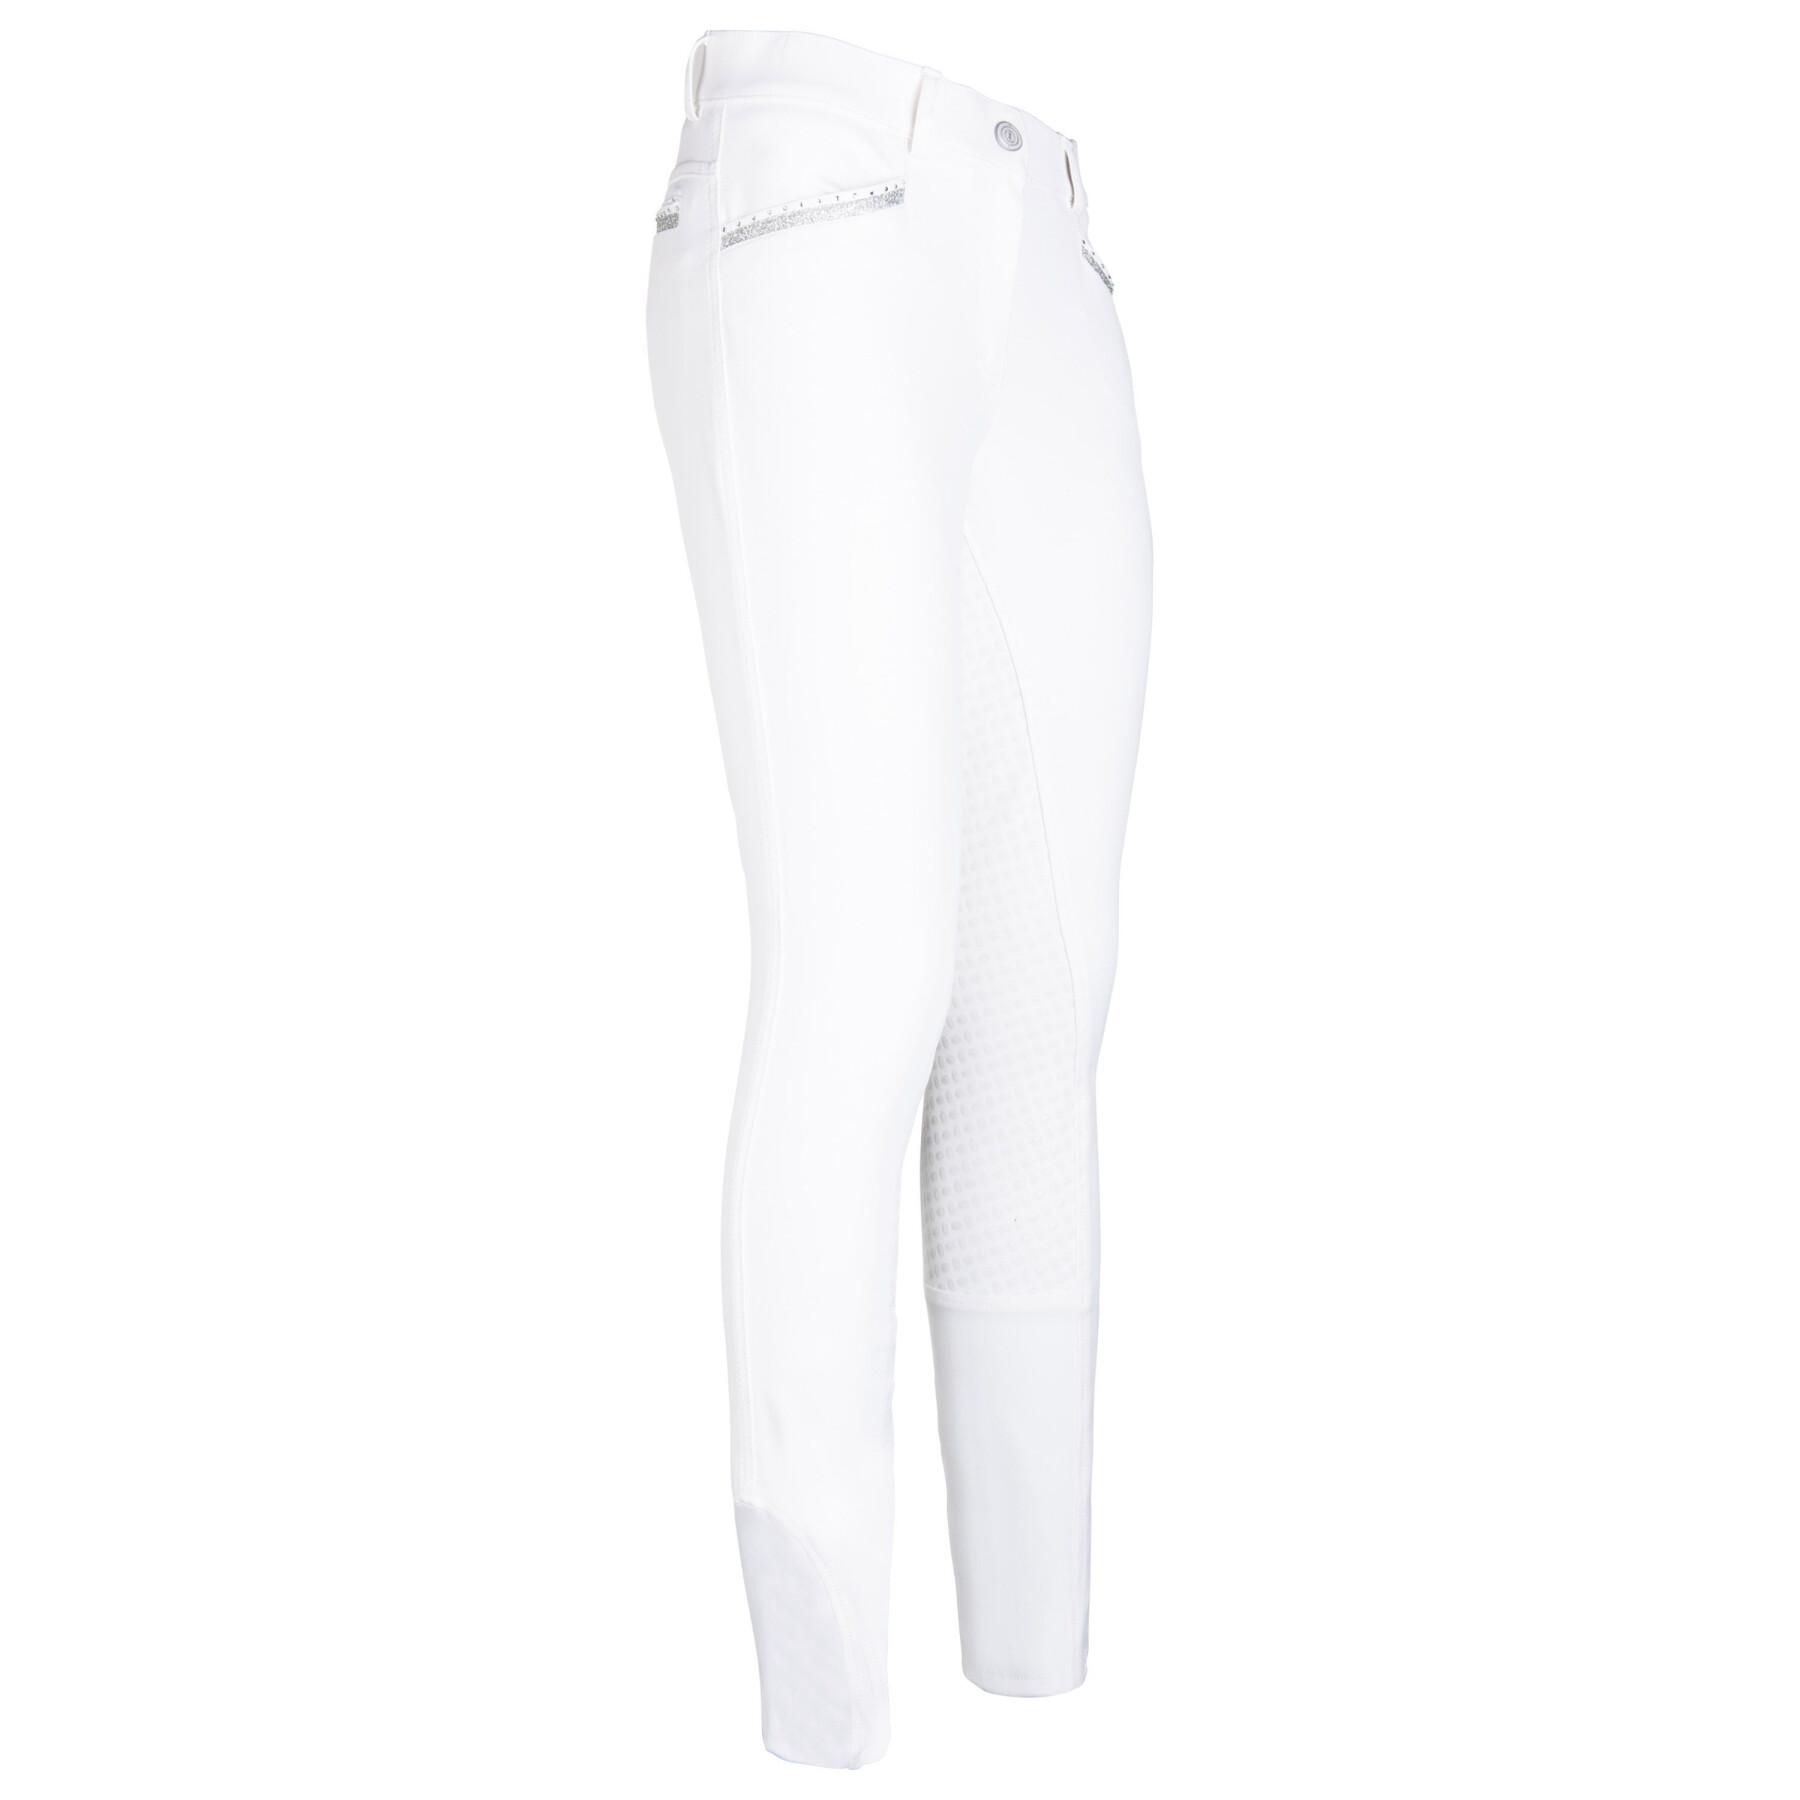 Full grip riding pants for girls Imperial Riding El Capone